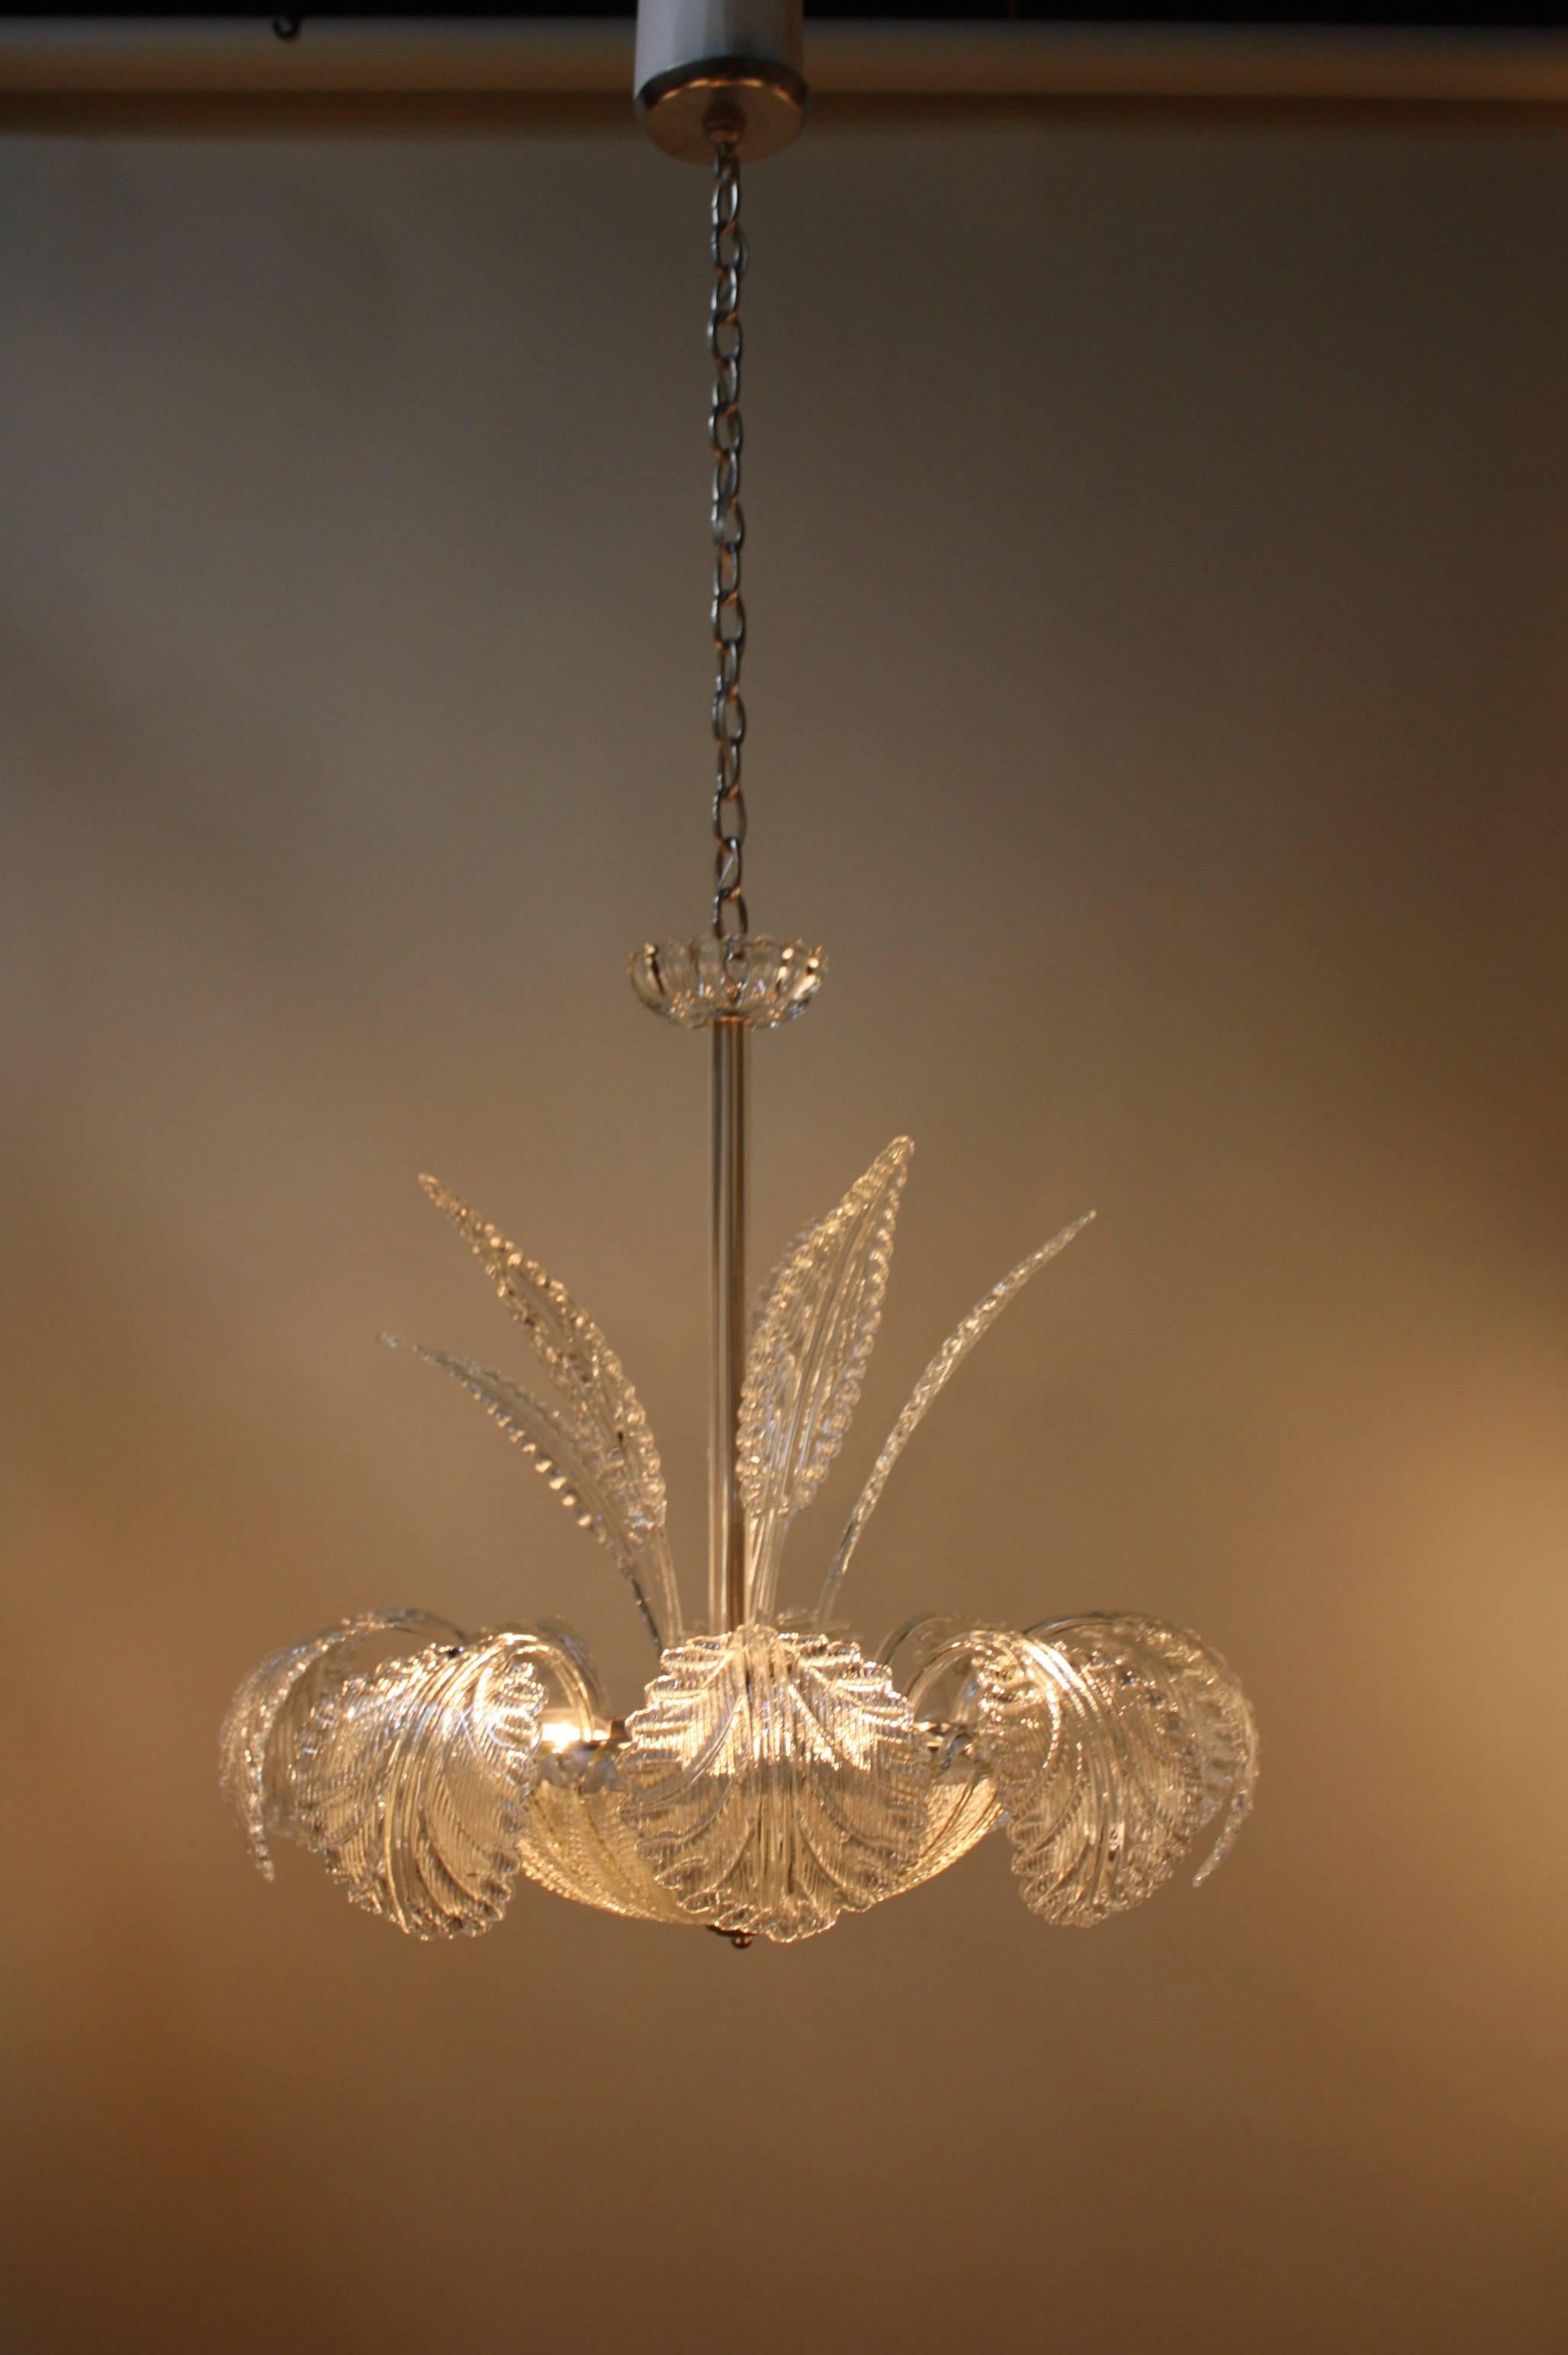 Exquisite handblown Murano glass chandelier by Barovier & Toso.
This chandelier is 25